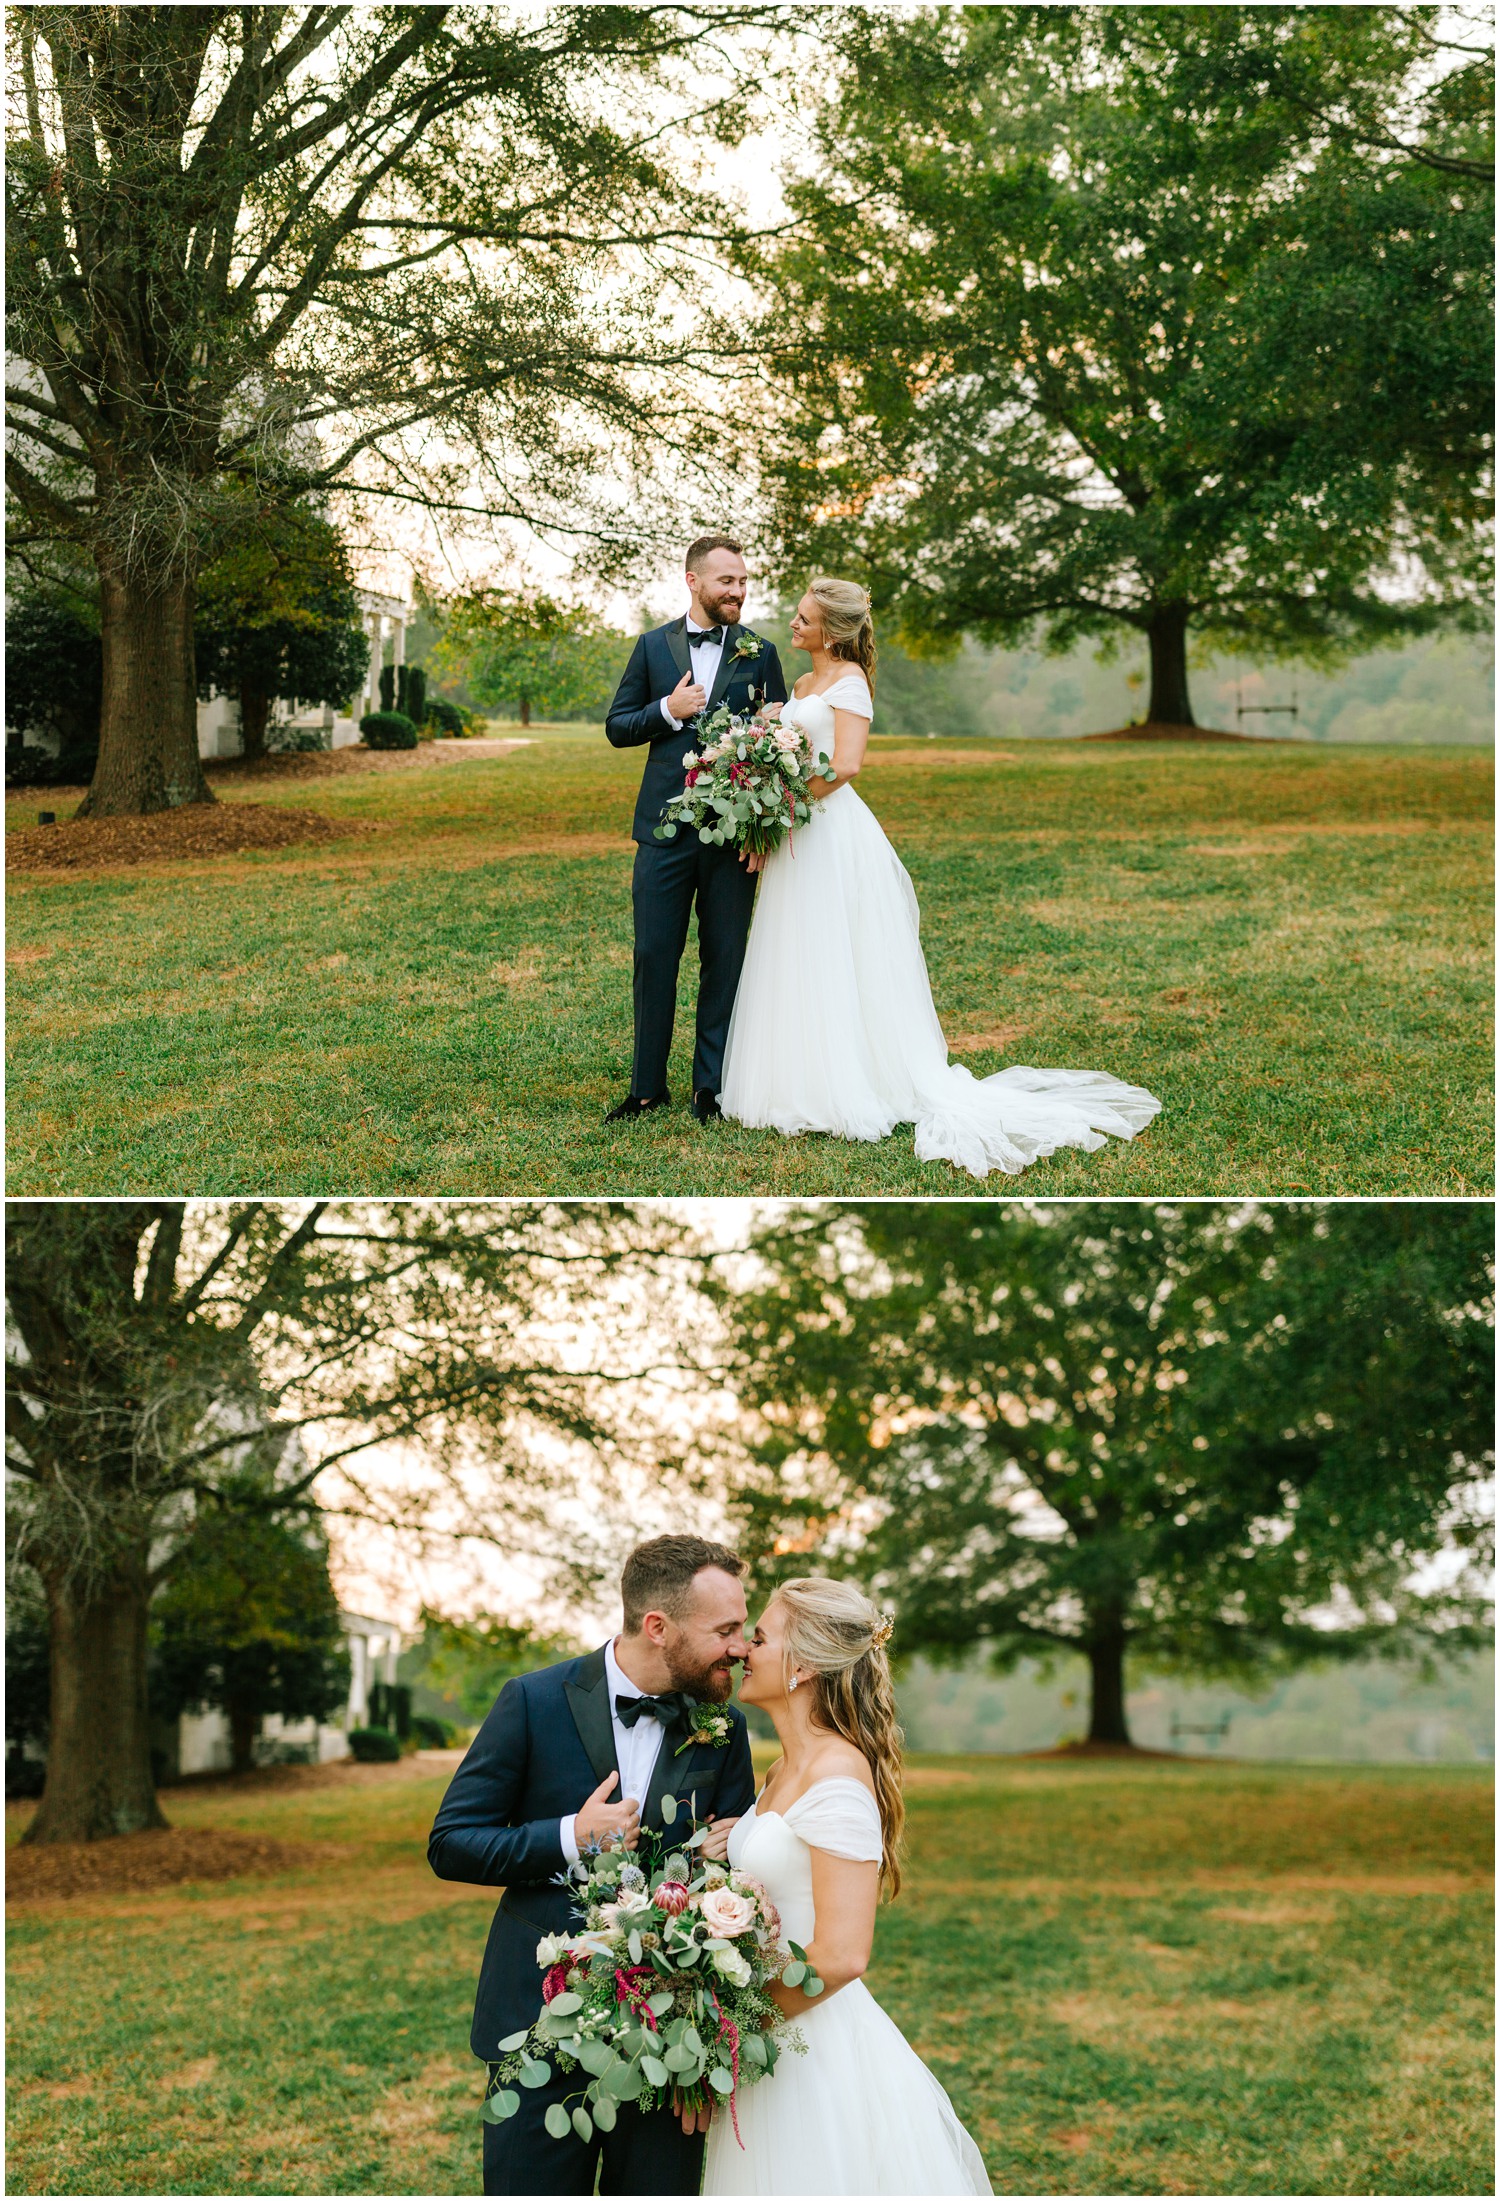 Raleigh NC wedding photos in field with groom in navy suit holding lapel